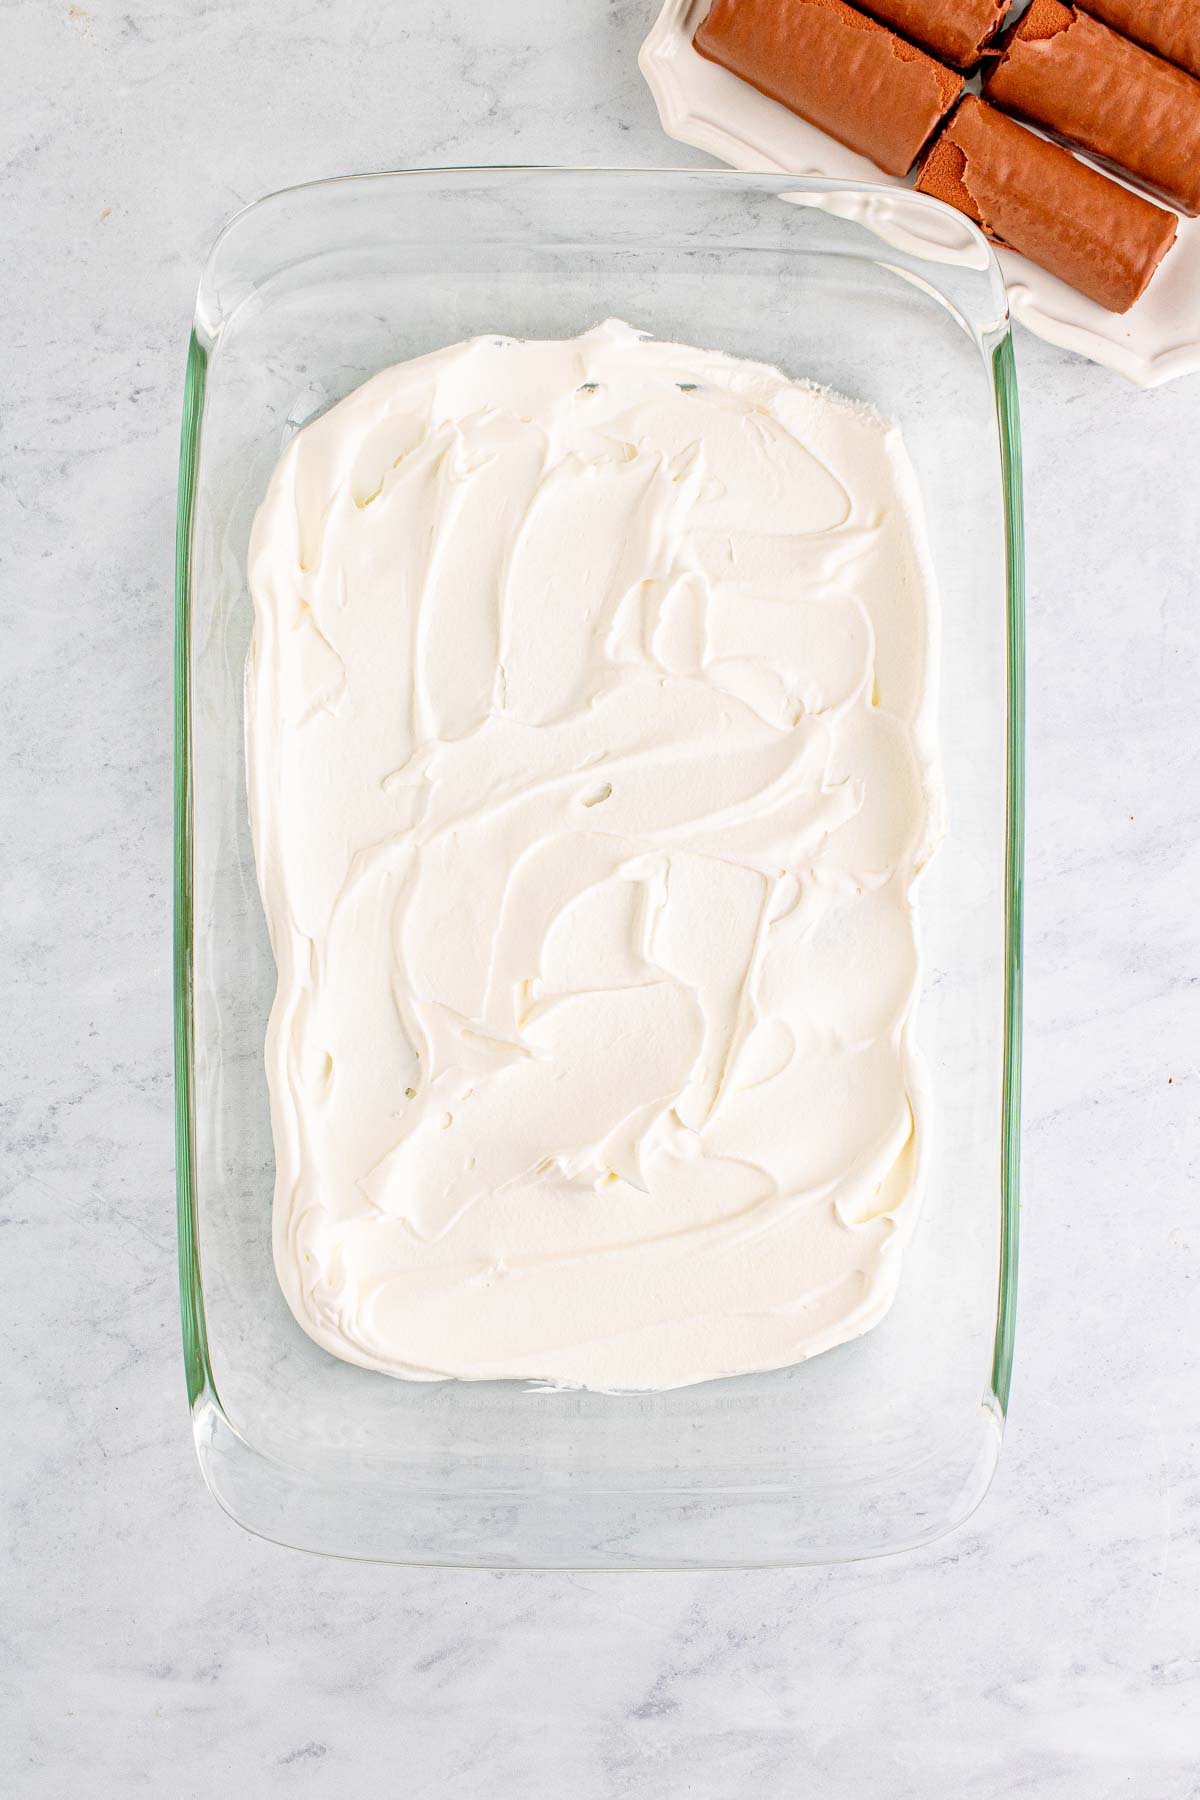 layer of Cool Whip on the bottom of a baking dish